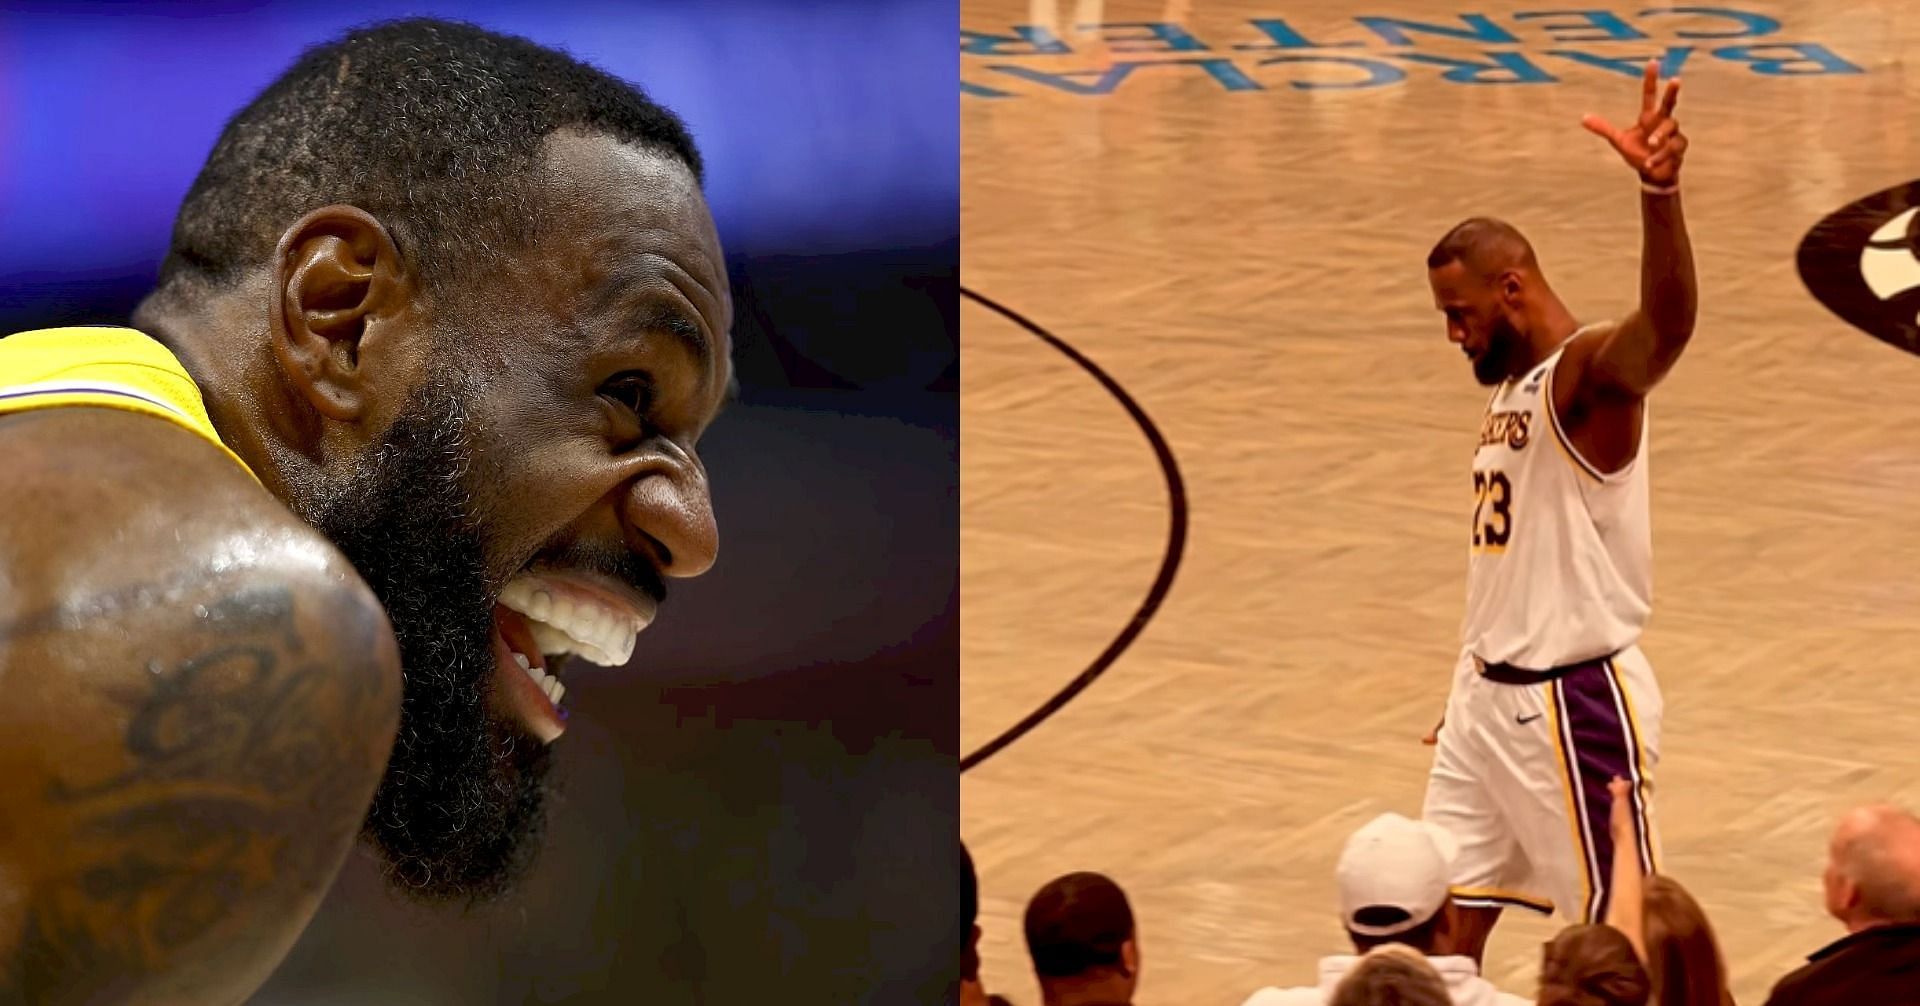 Did fans sing &quot;You Are My Sunshine&quot; to LeBron James after 40-point night vs Nets? Debunking viral video